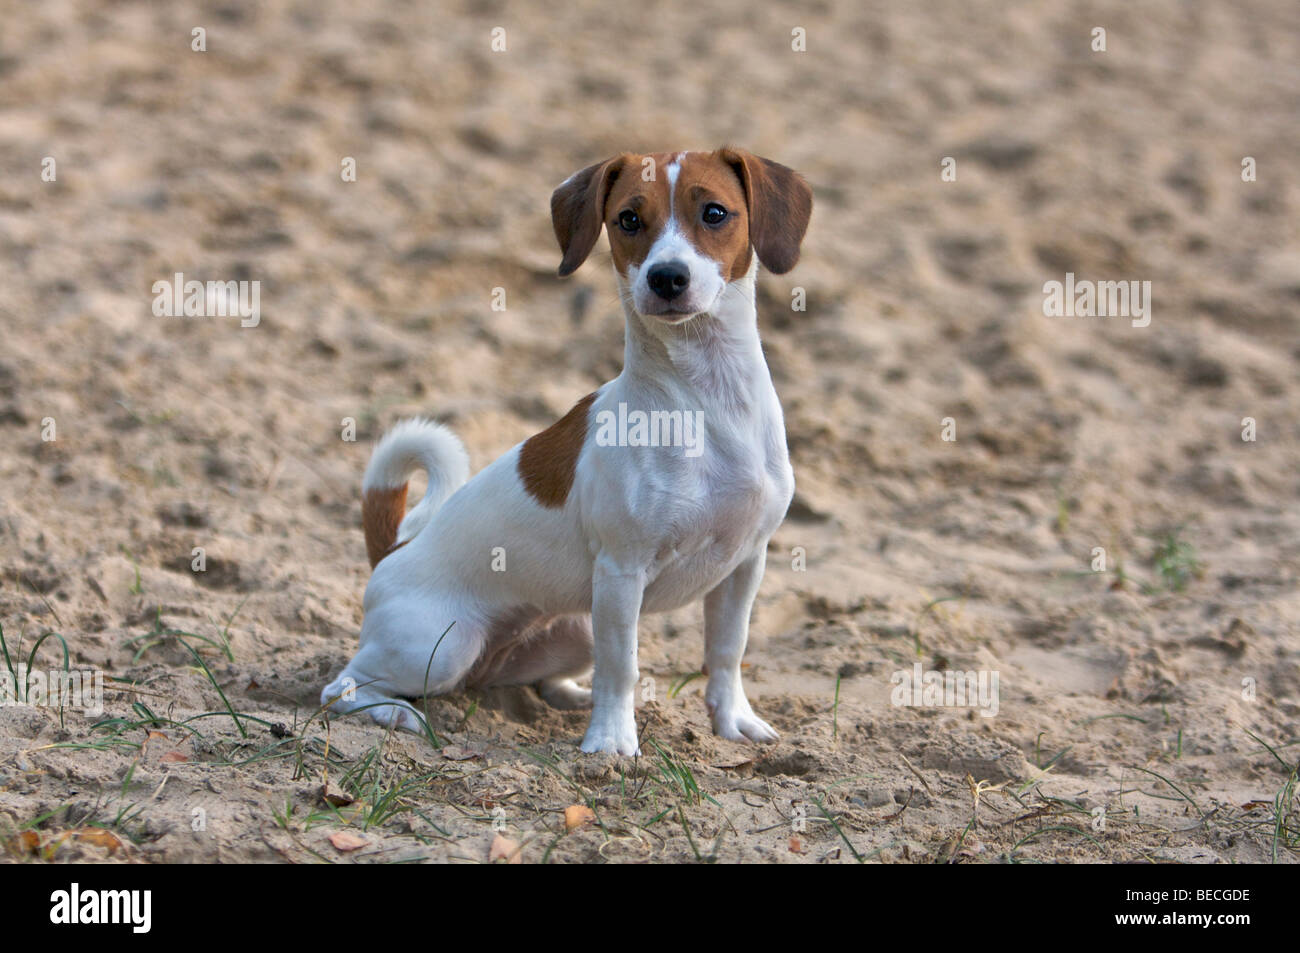 Jack Russel Mix High Resolution Stock Photography and Images - Alamy